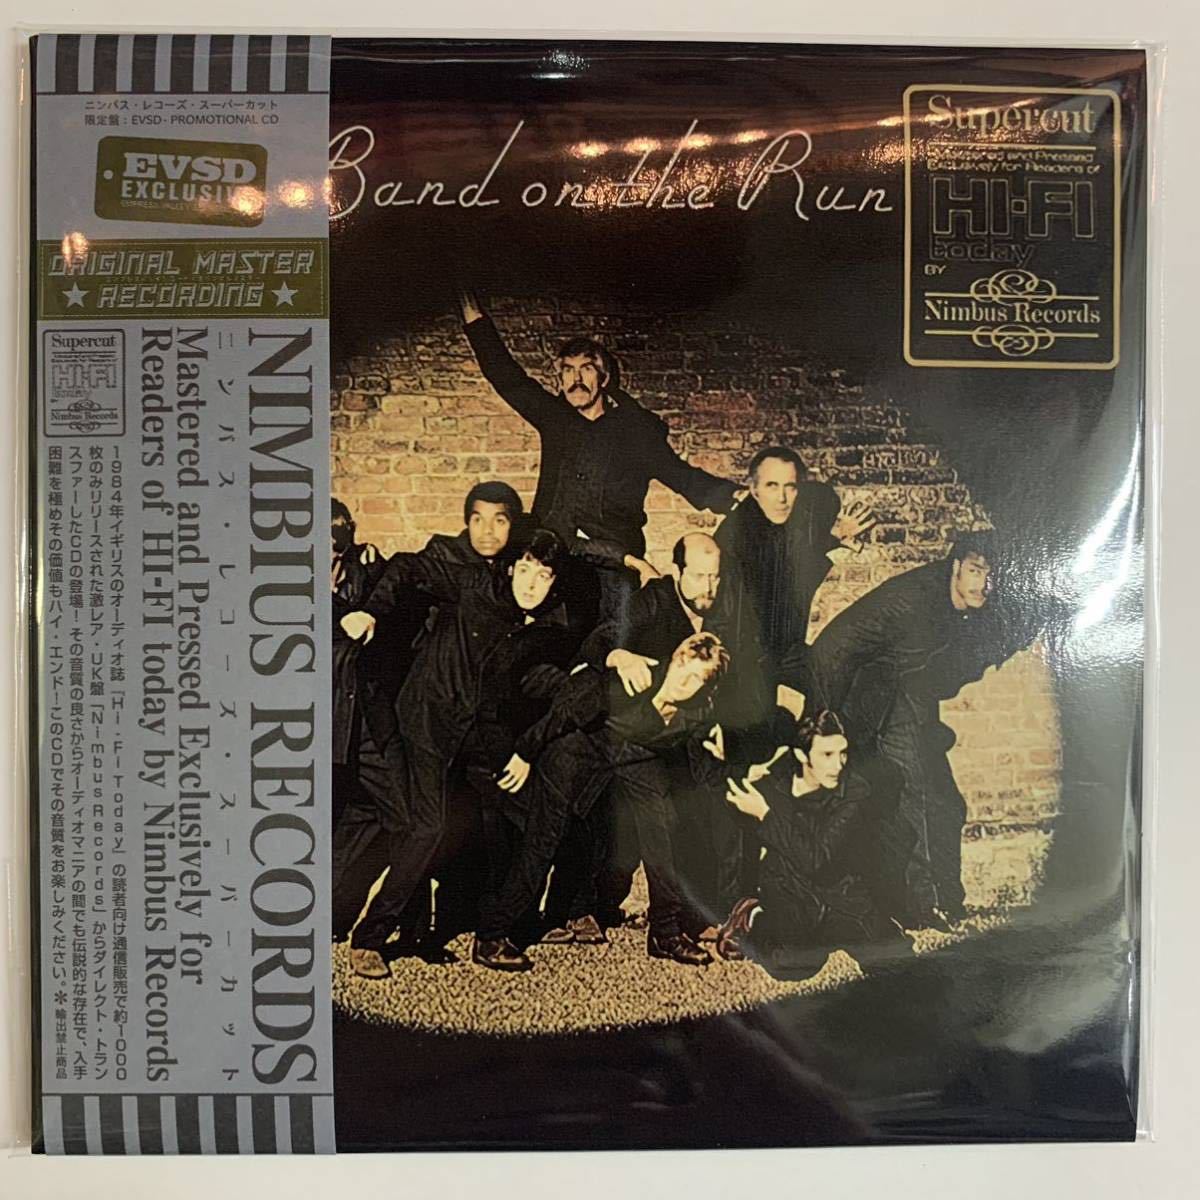 Paul McCartney and the Wings / Band On the Run Nimbus Records